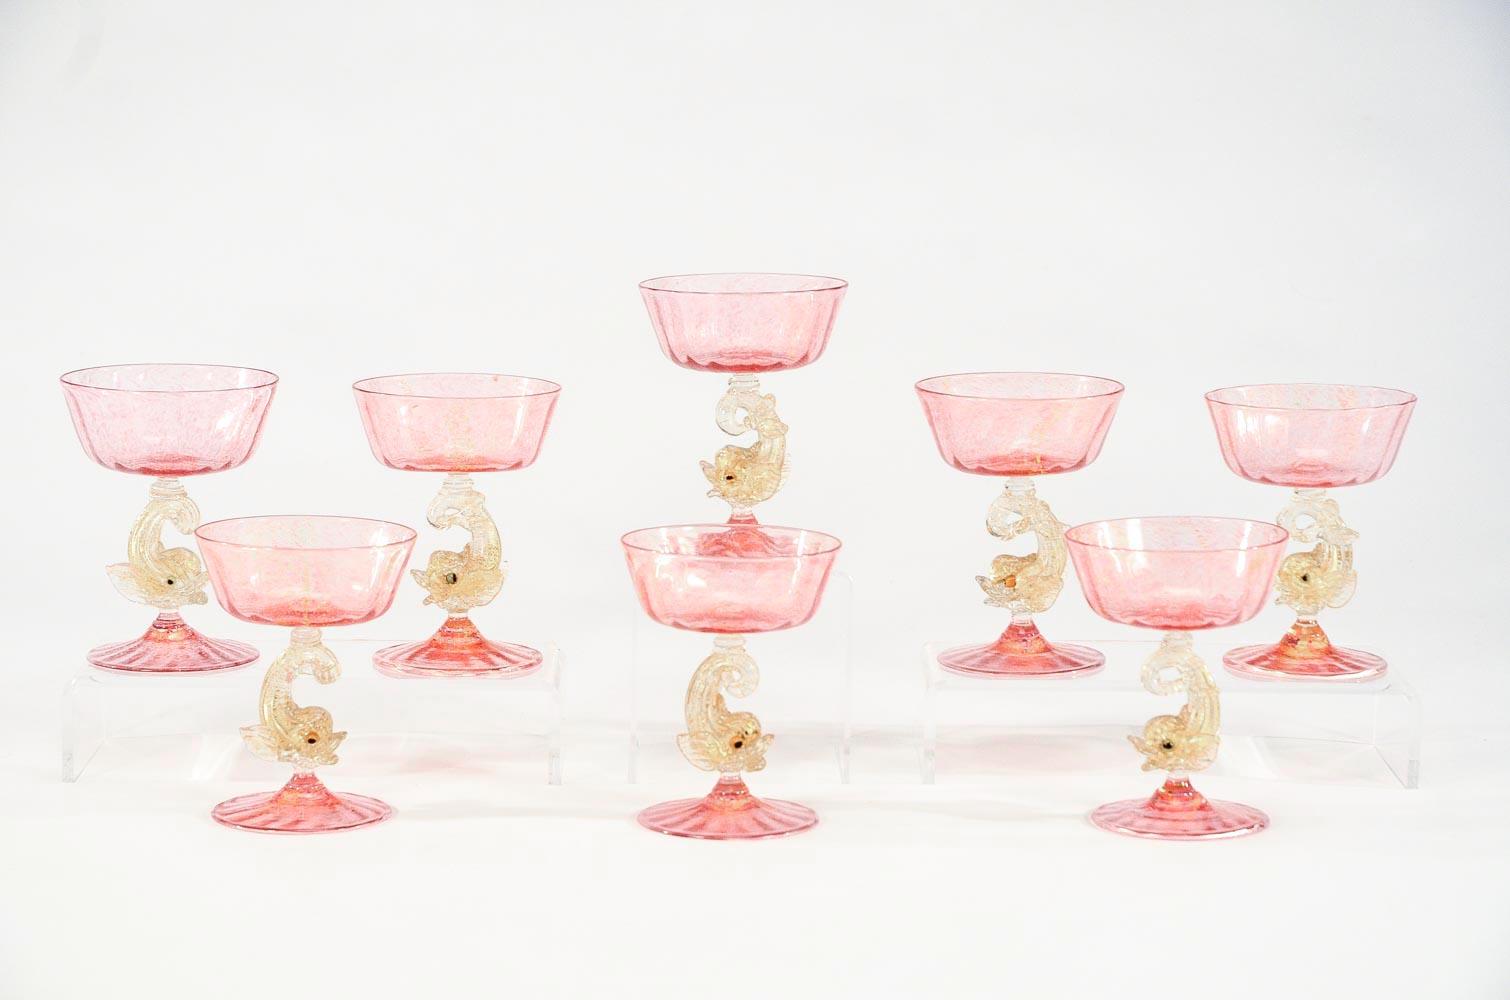 Ready for the season of celebration, this set of eight handblown champagne coupes are sure to enhance any occasion. Made by Salviati, these feature rose pink optic rib bowl and foot with gold leaf inclusions and topped off with full figural dolphin